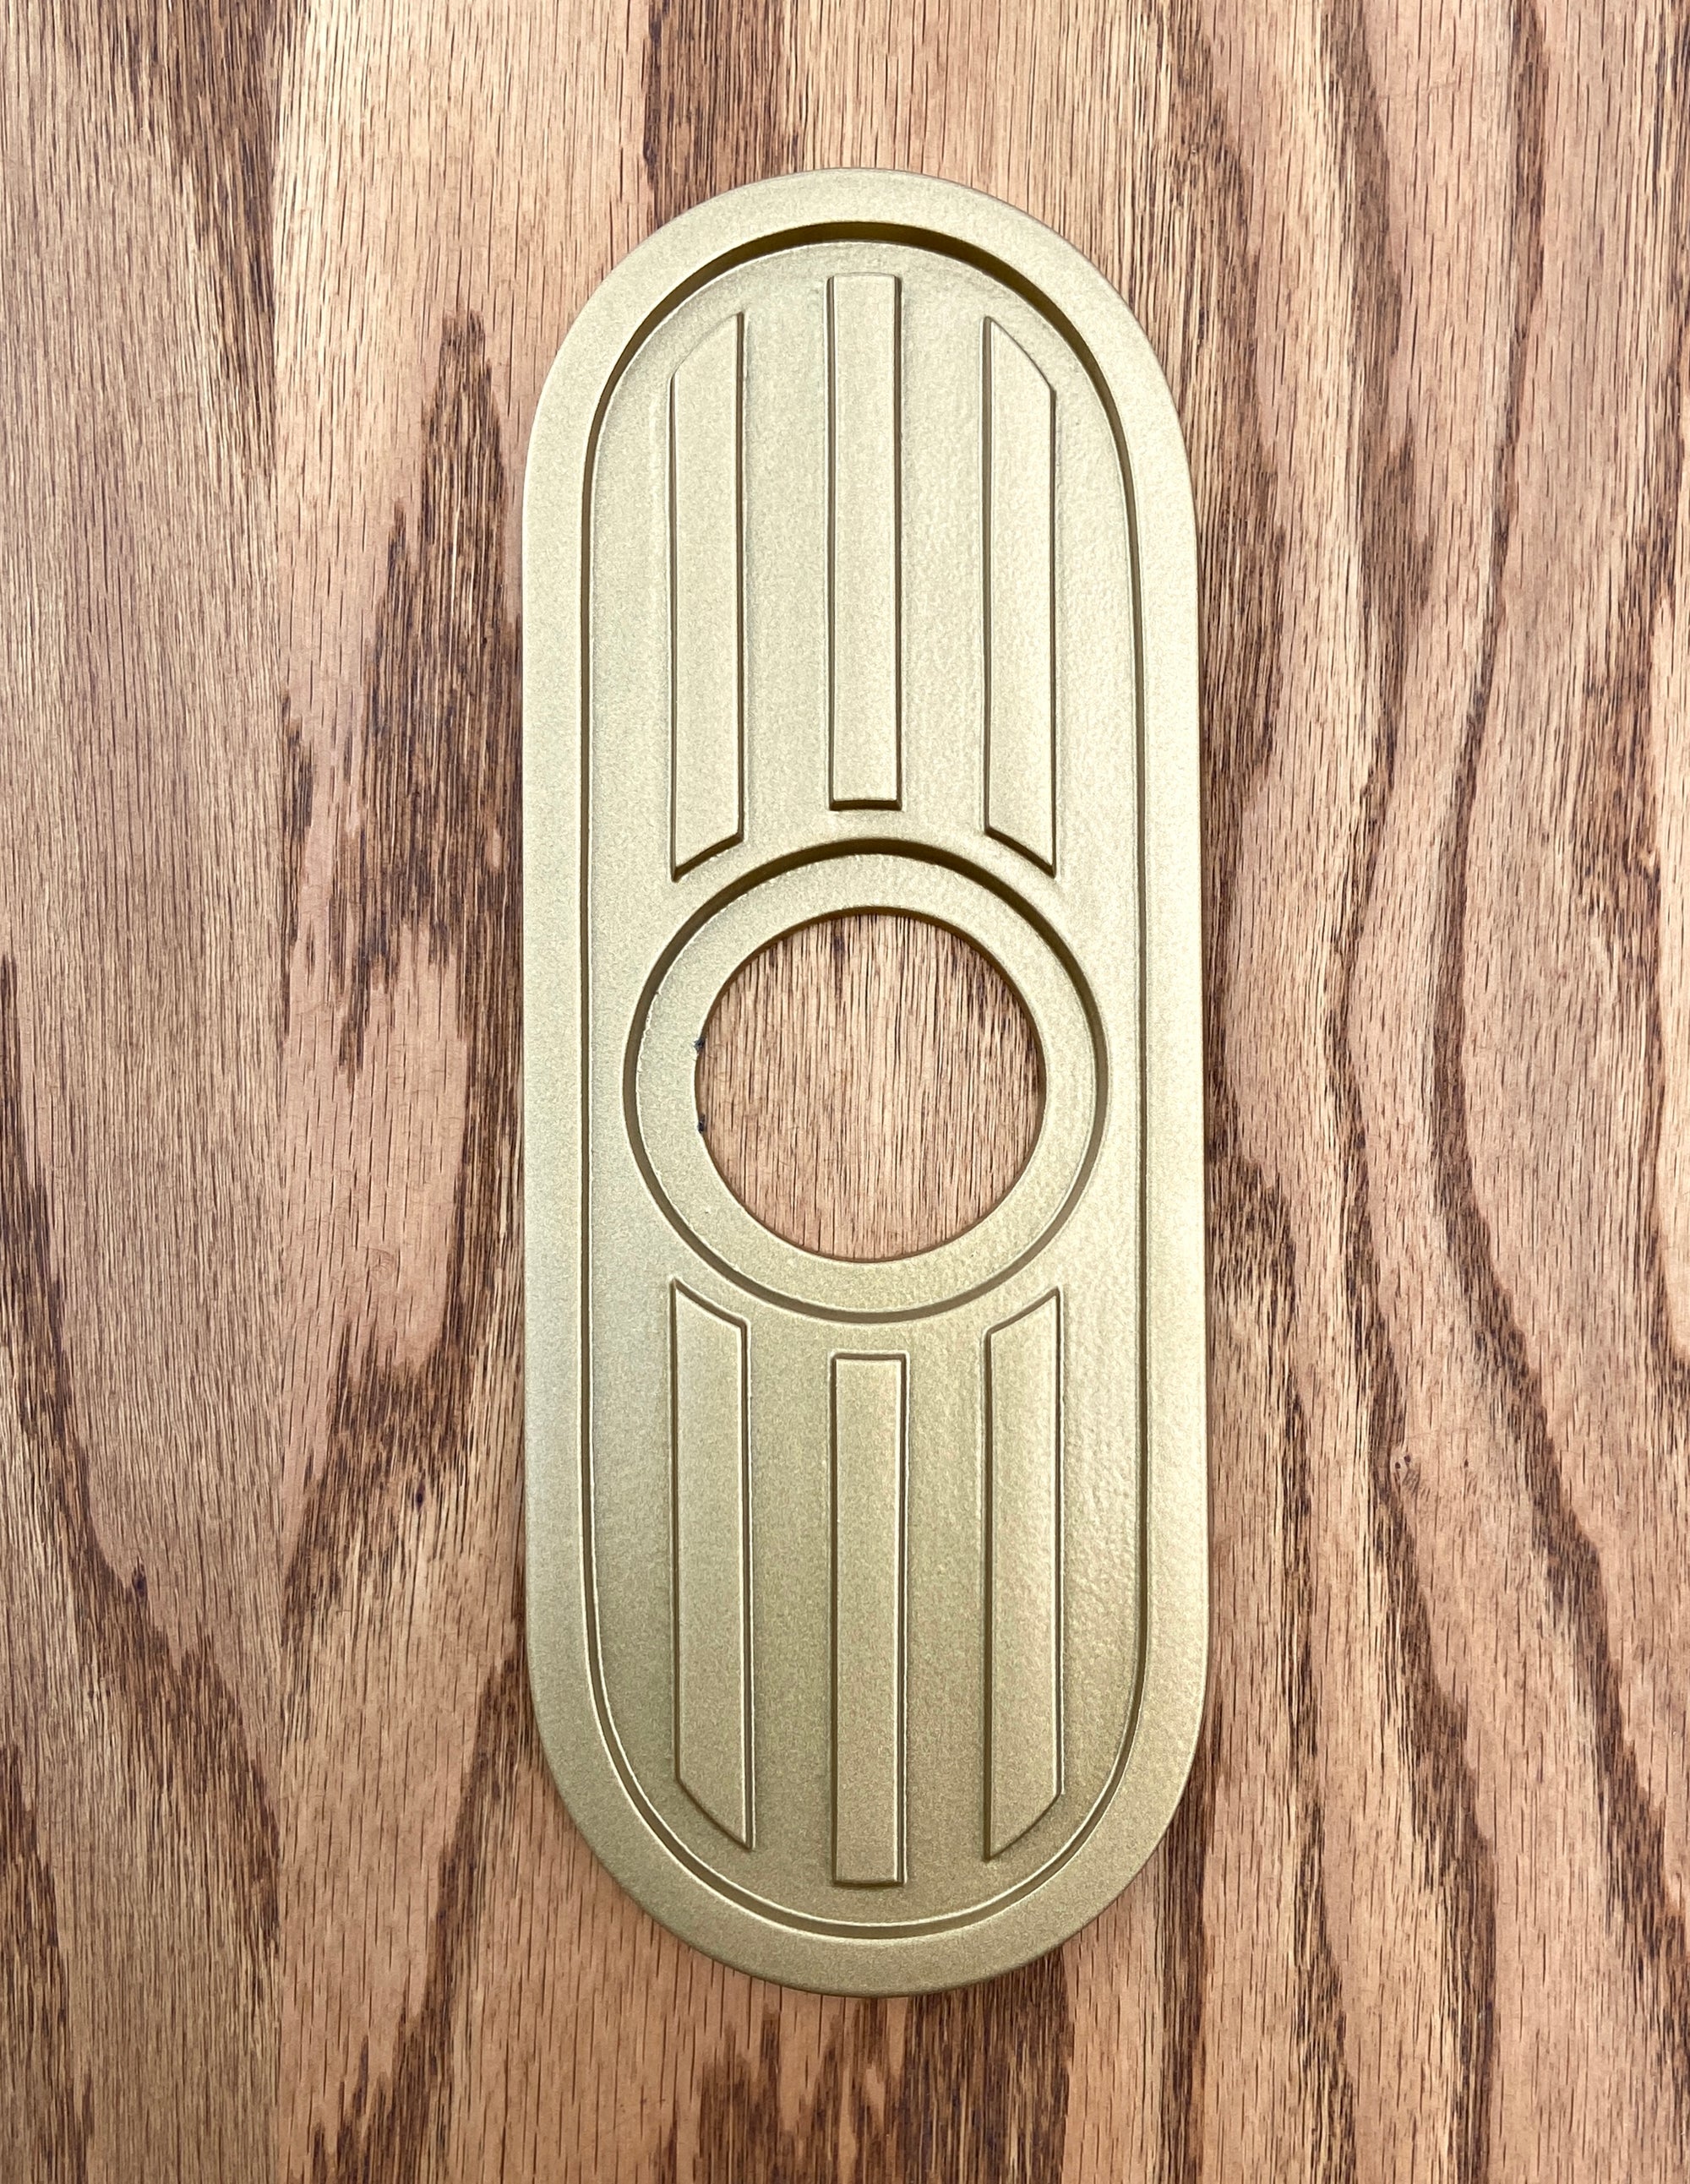 Gold powder coated escutcheon. The entire piece is gold. The surface is very smooth and has a metallic shine that reflects the light.